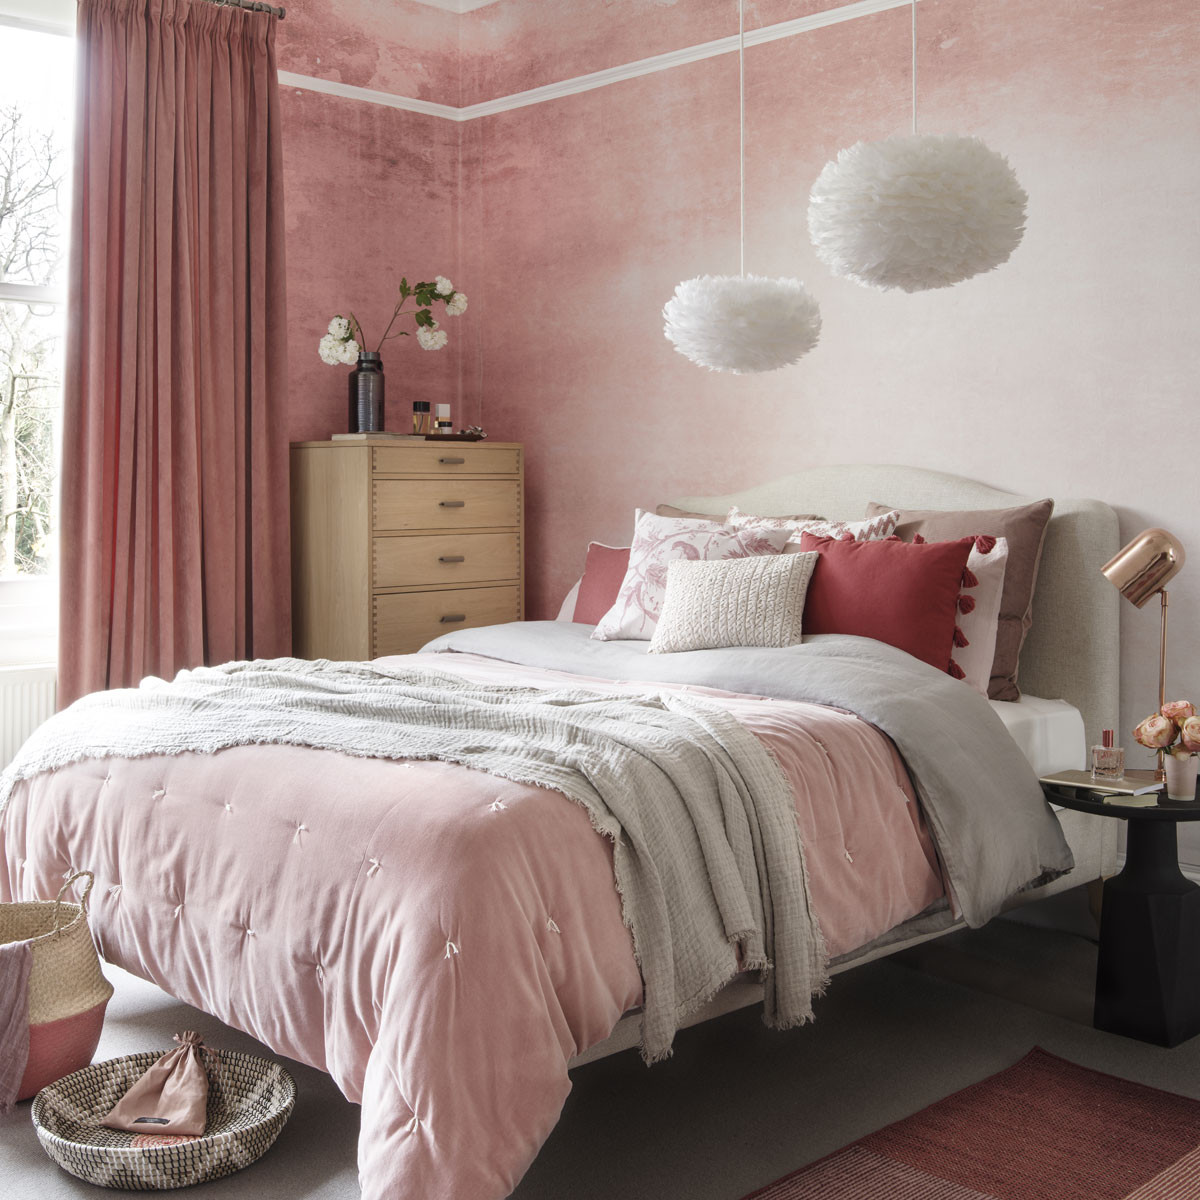 Pink Bedroom Walls
 How to decorate with coral blush tones